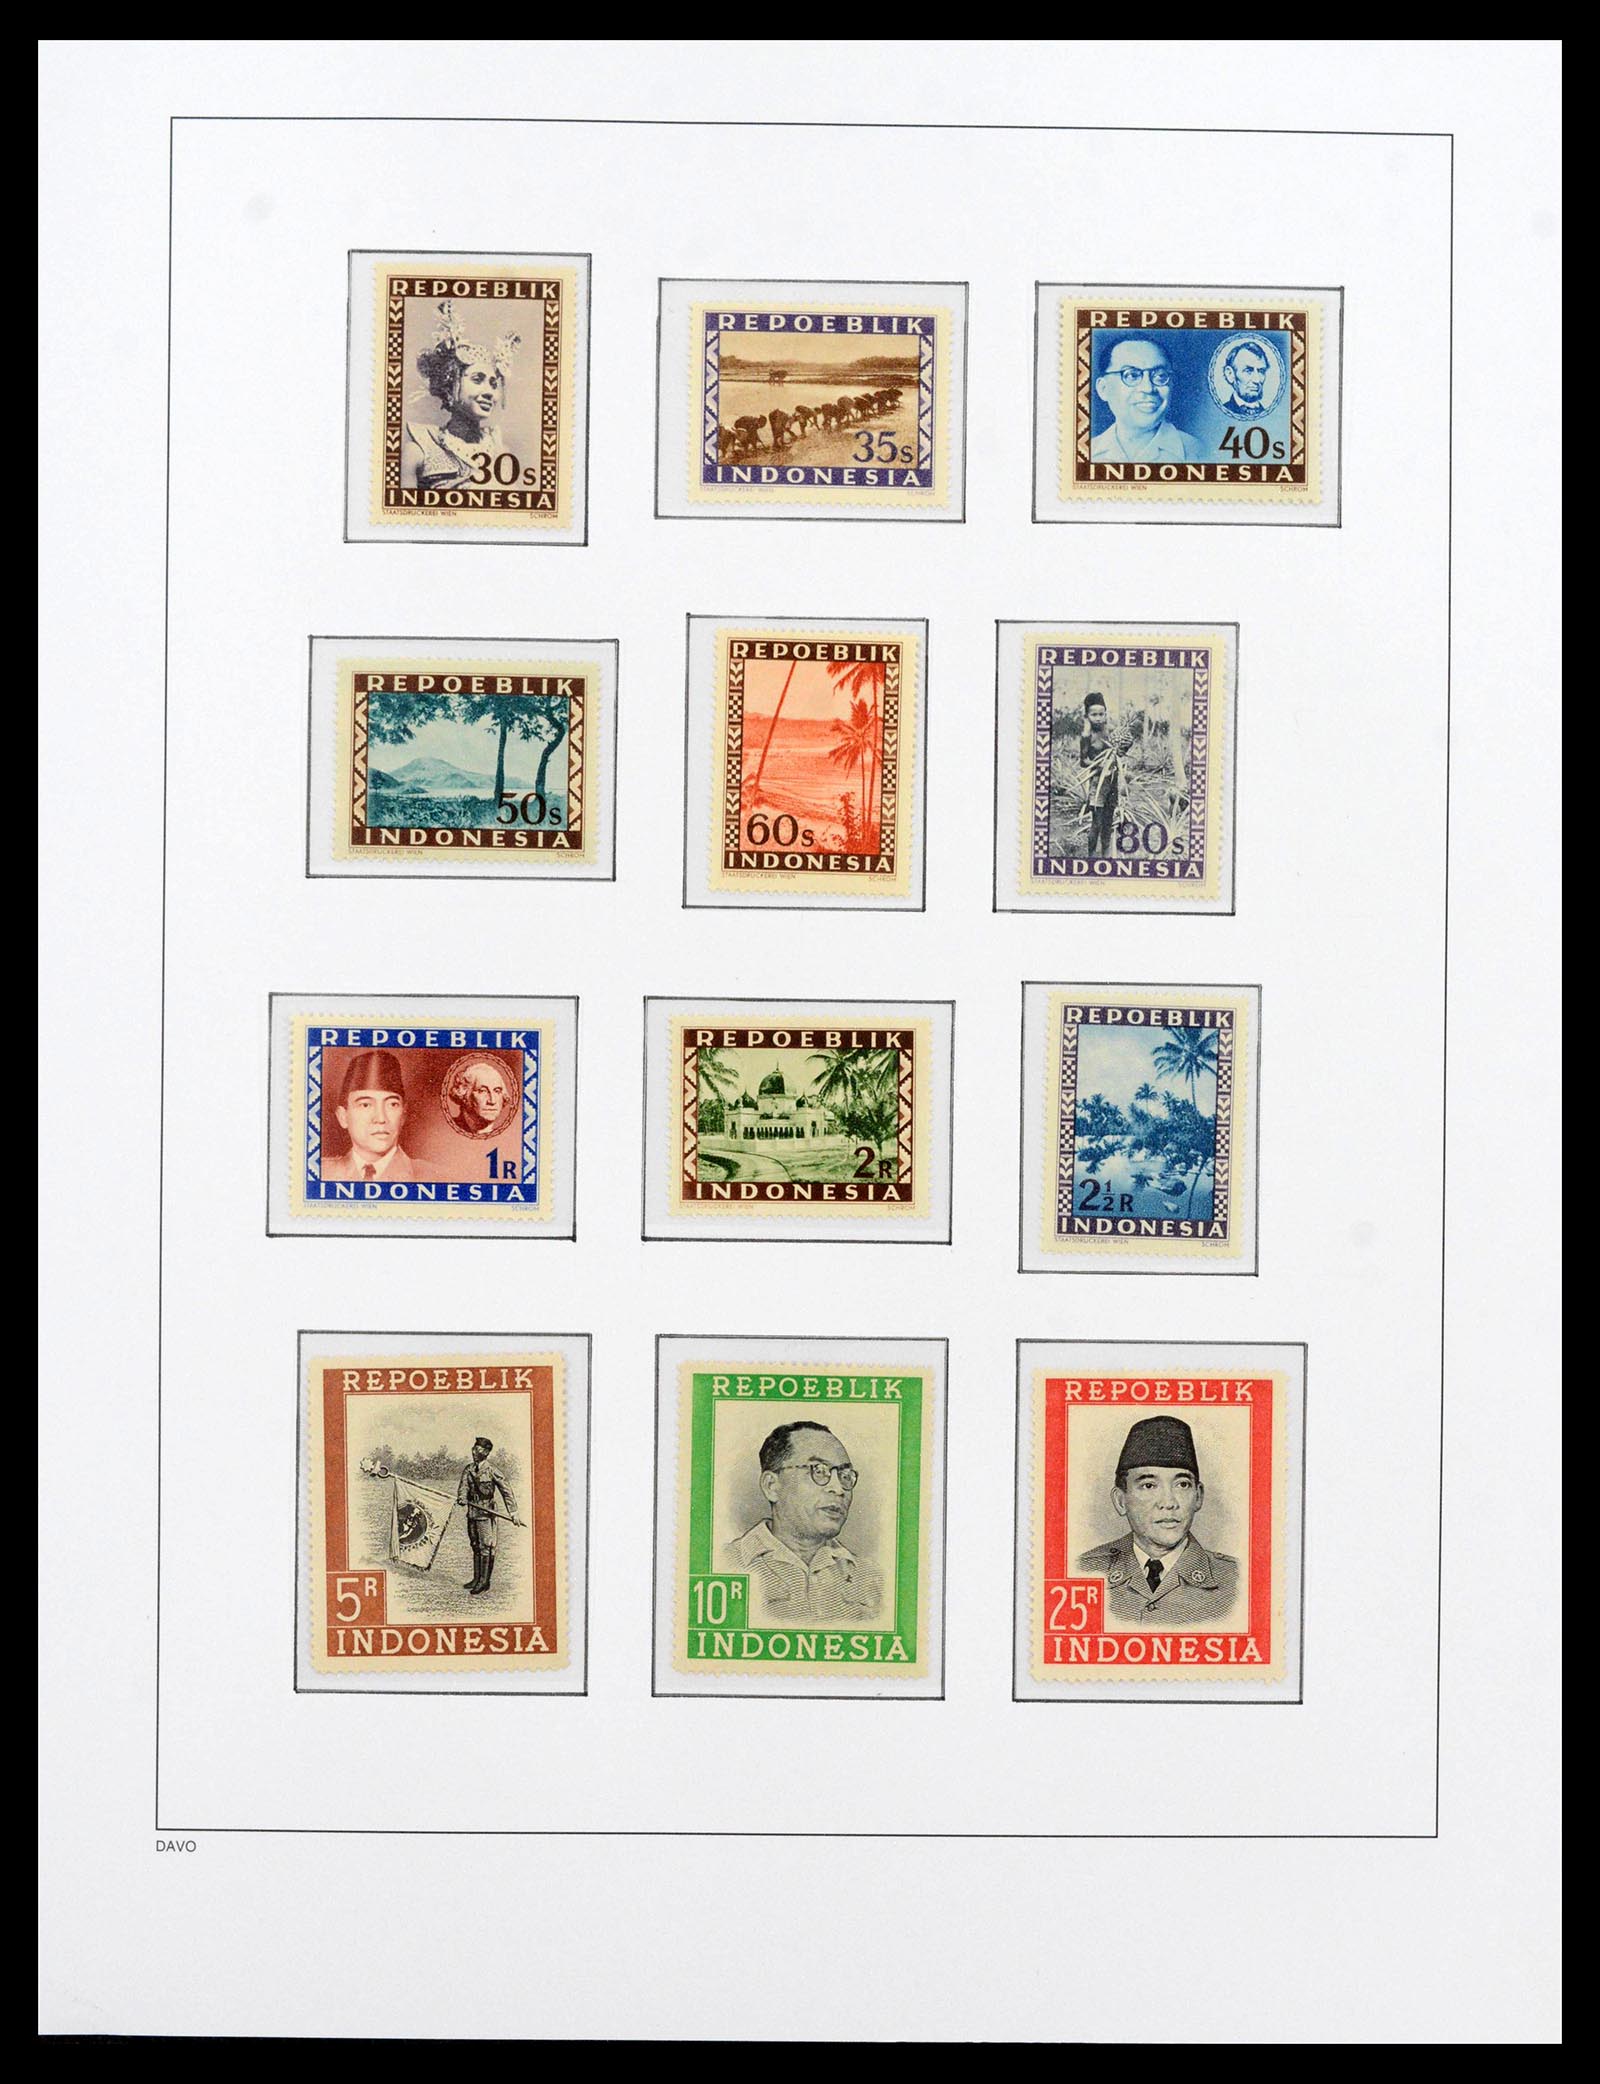 39421 0018 - Stamp collection 39421 Japanese occupation and interim period in the Dut